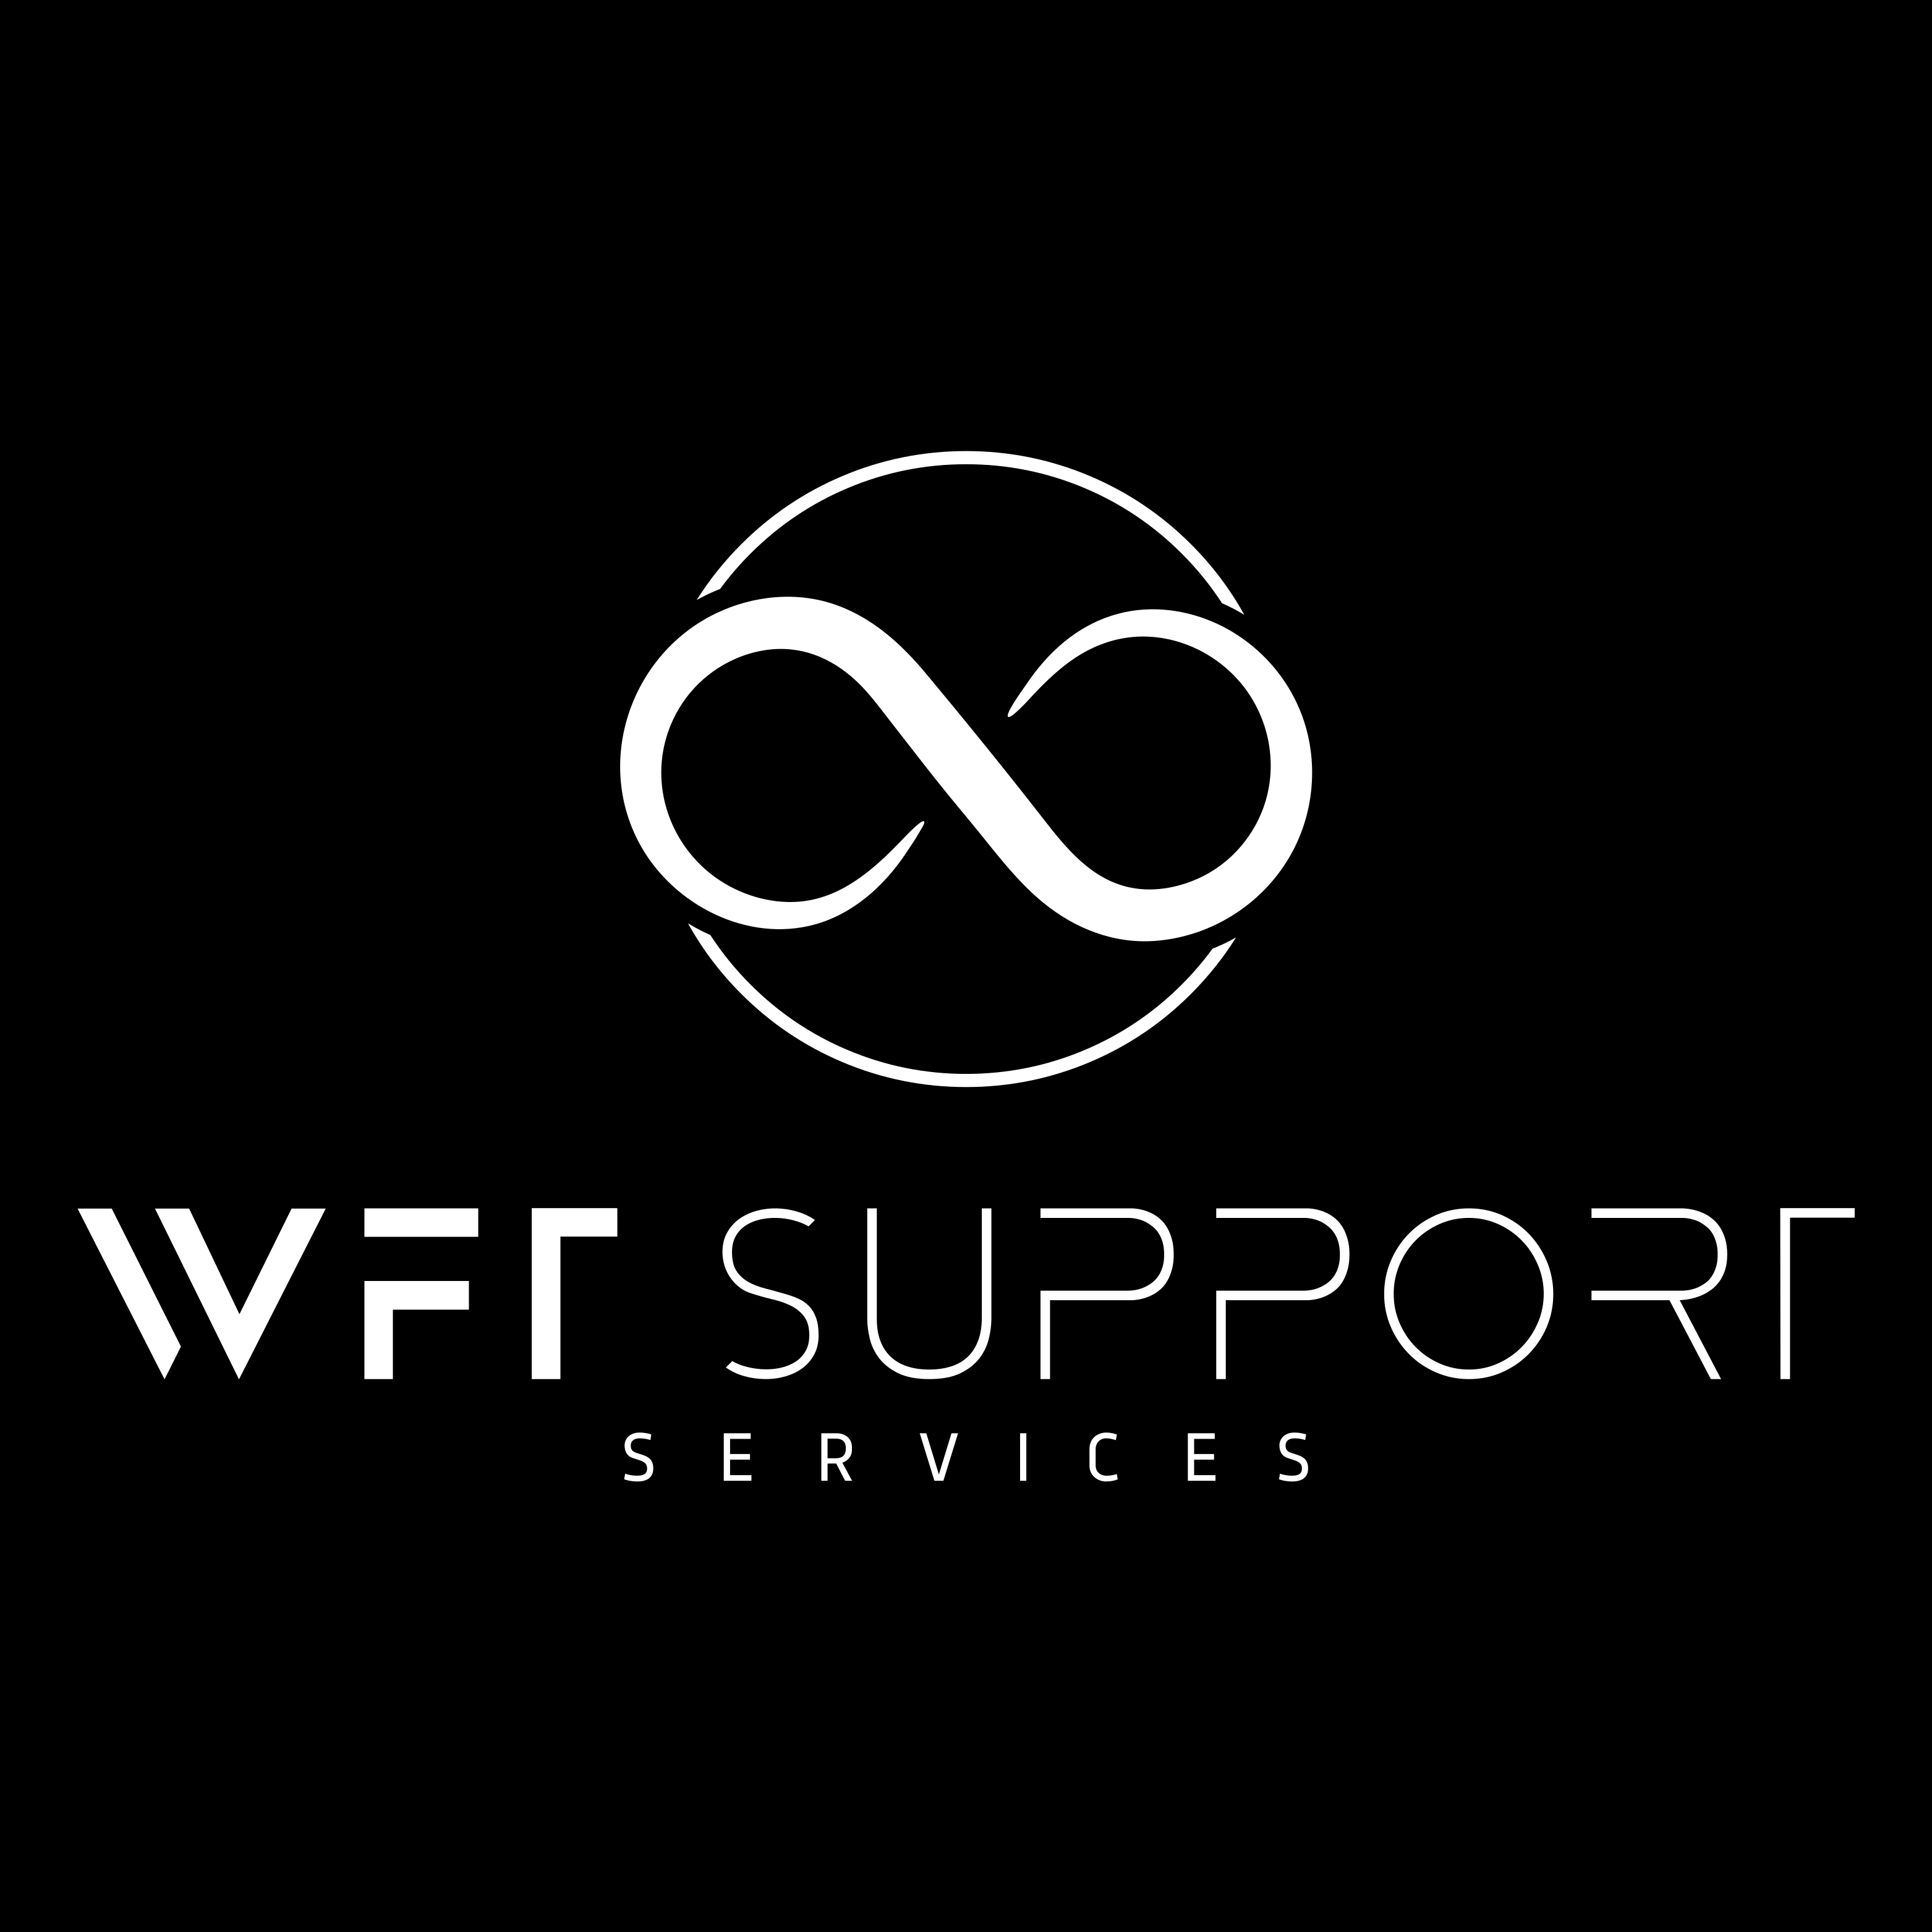 WFT Support Services